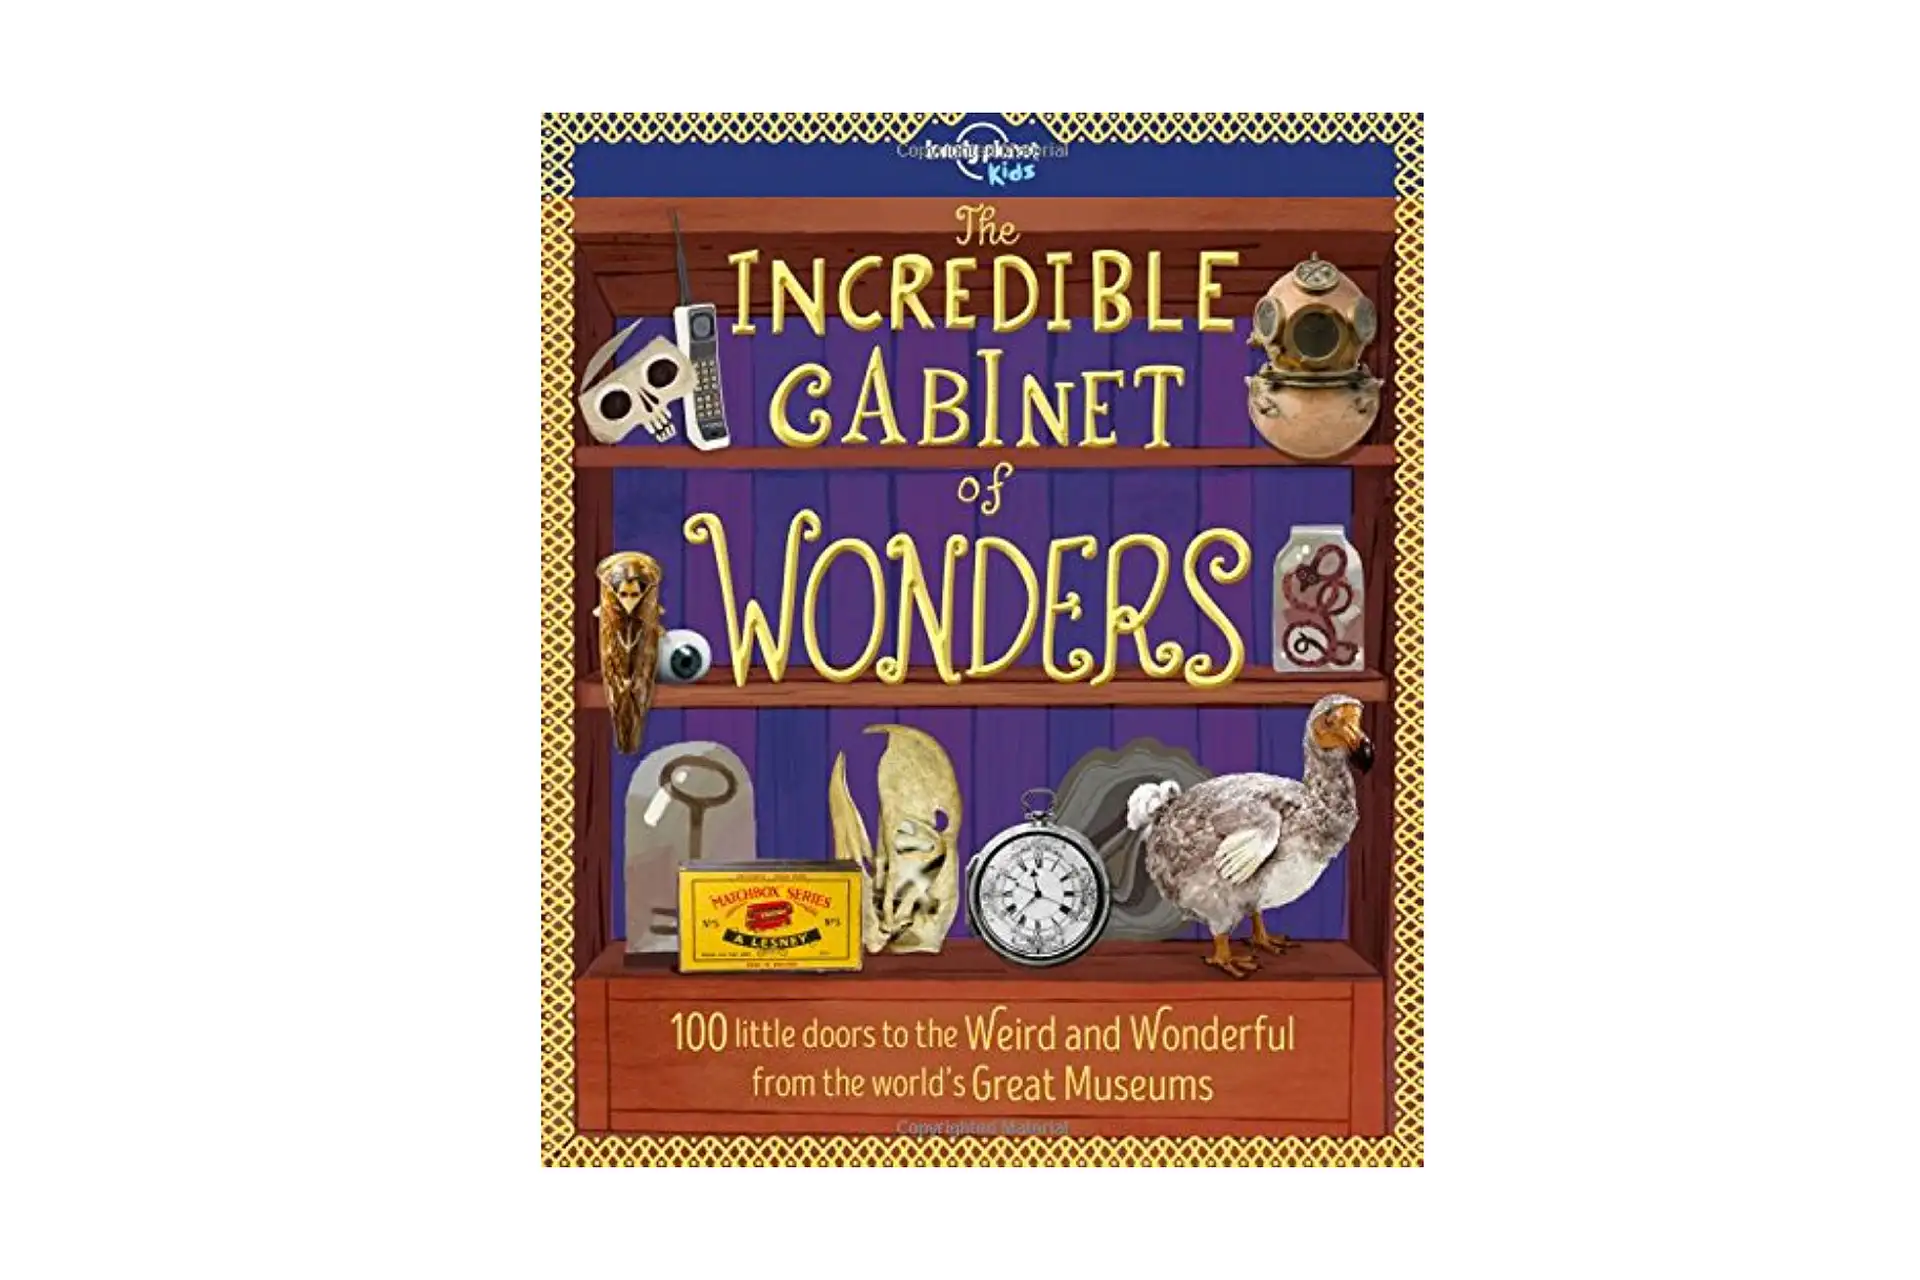 "The Incredible Cabinet of Wonders"; Courtesy of Amazon